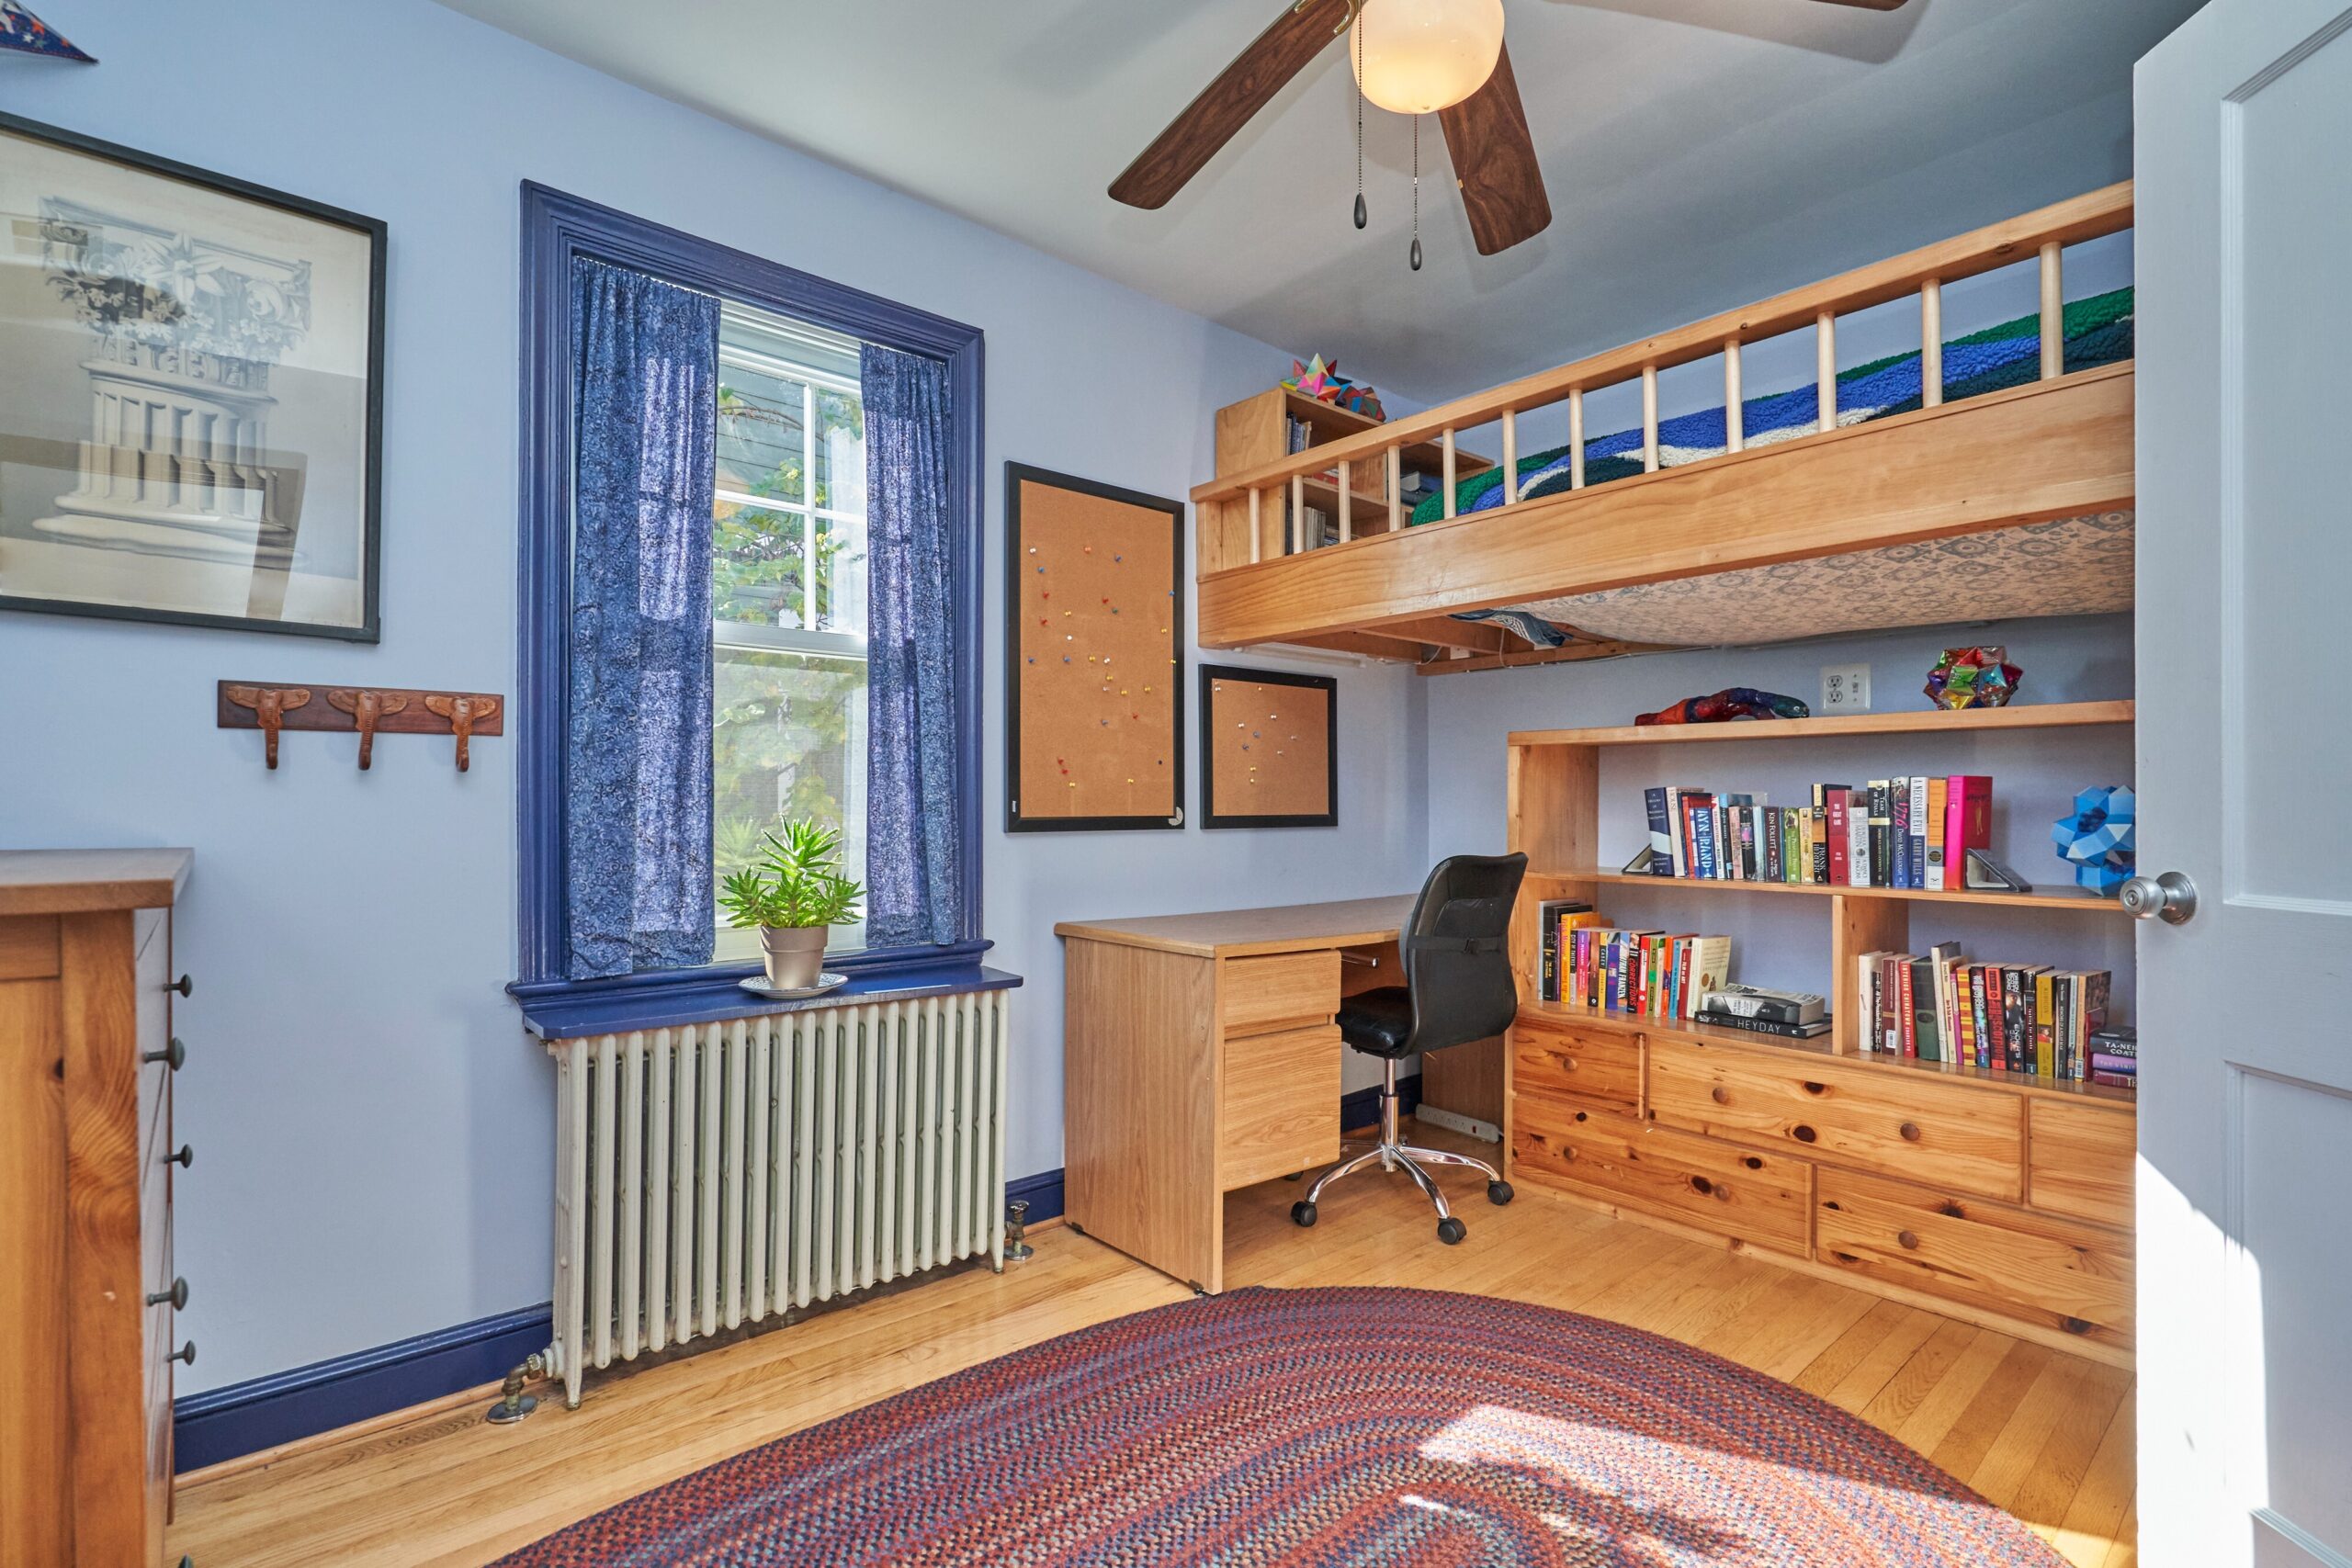 Professional interior photo of 15 N Fenwick Street - showing a bedroom with built in bookshelves and raised bed built in just below the ceiling over the desk and shelves